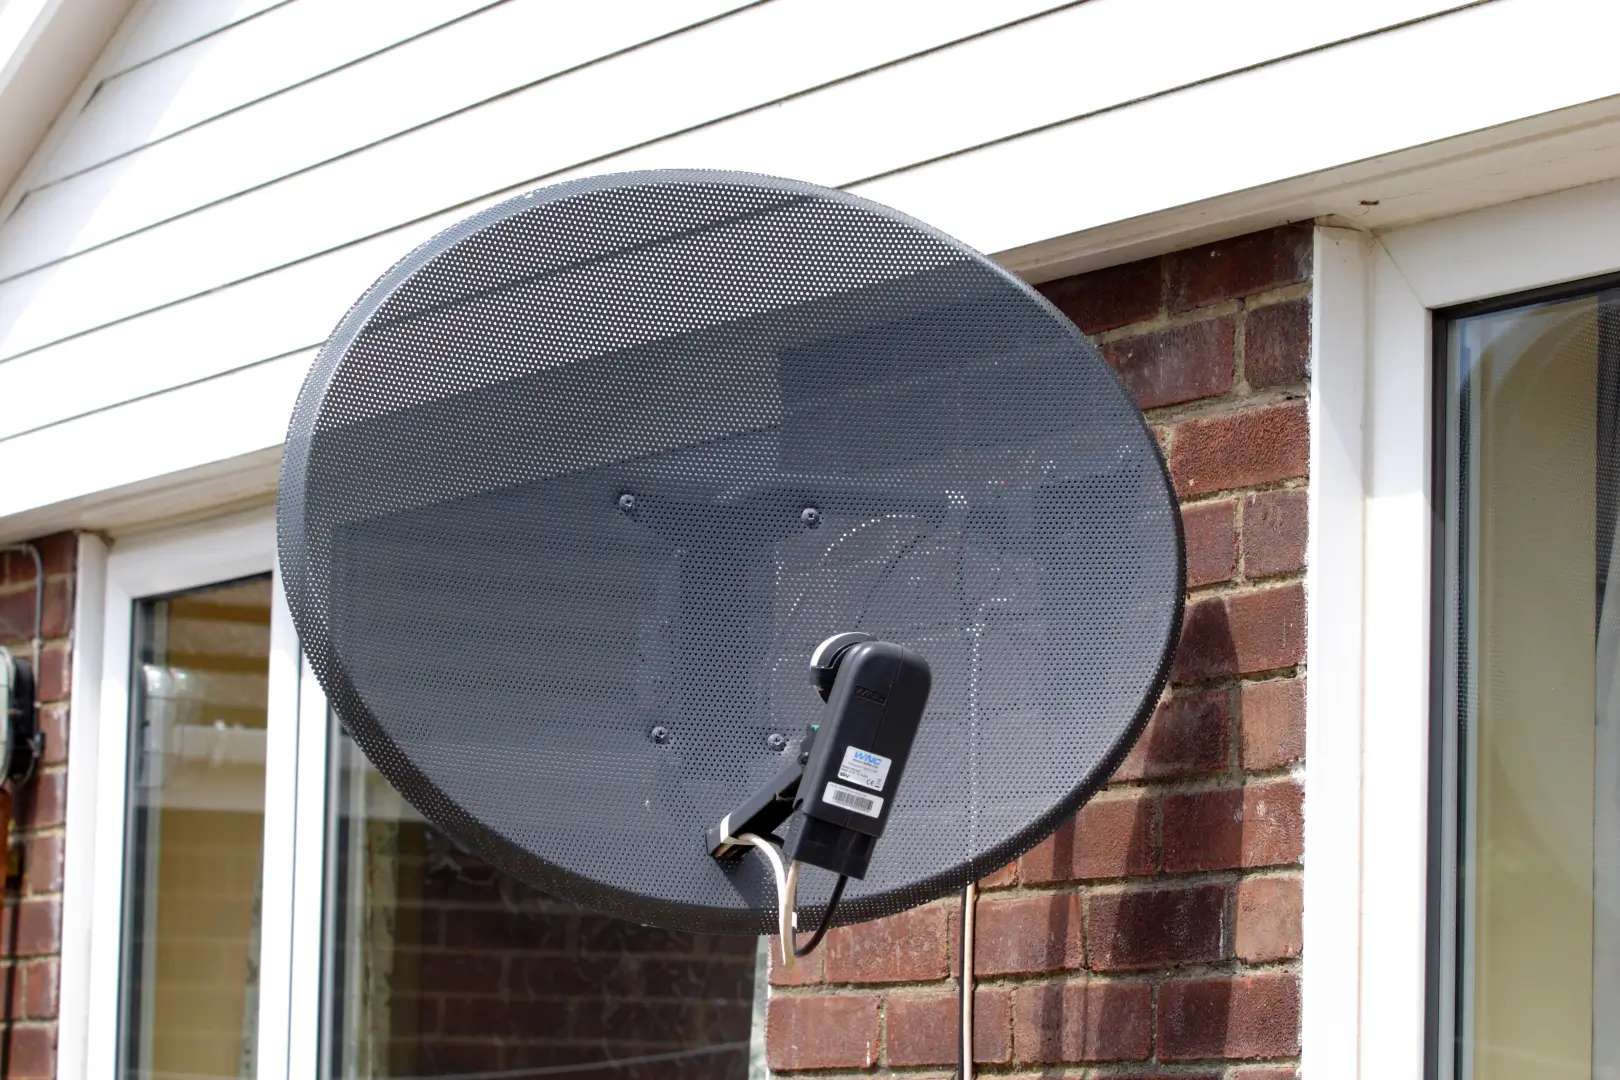 Difference Between Zone 1 and Zone 2 Sky Dishes